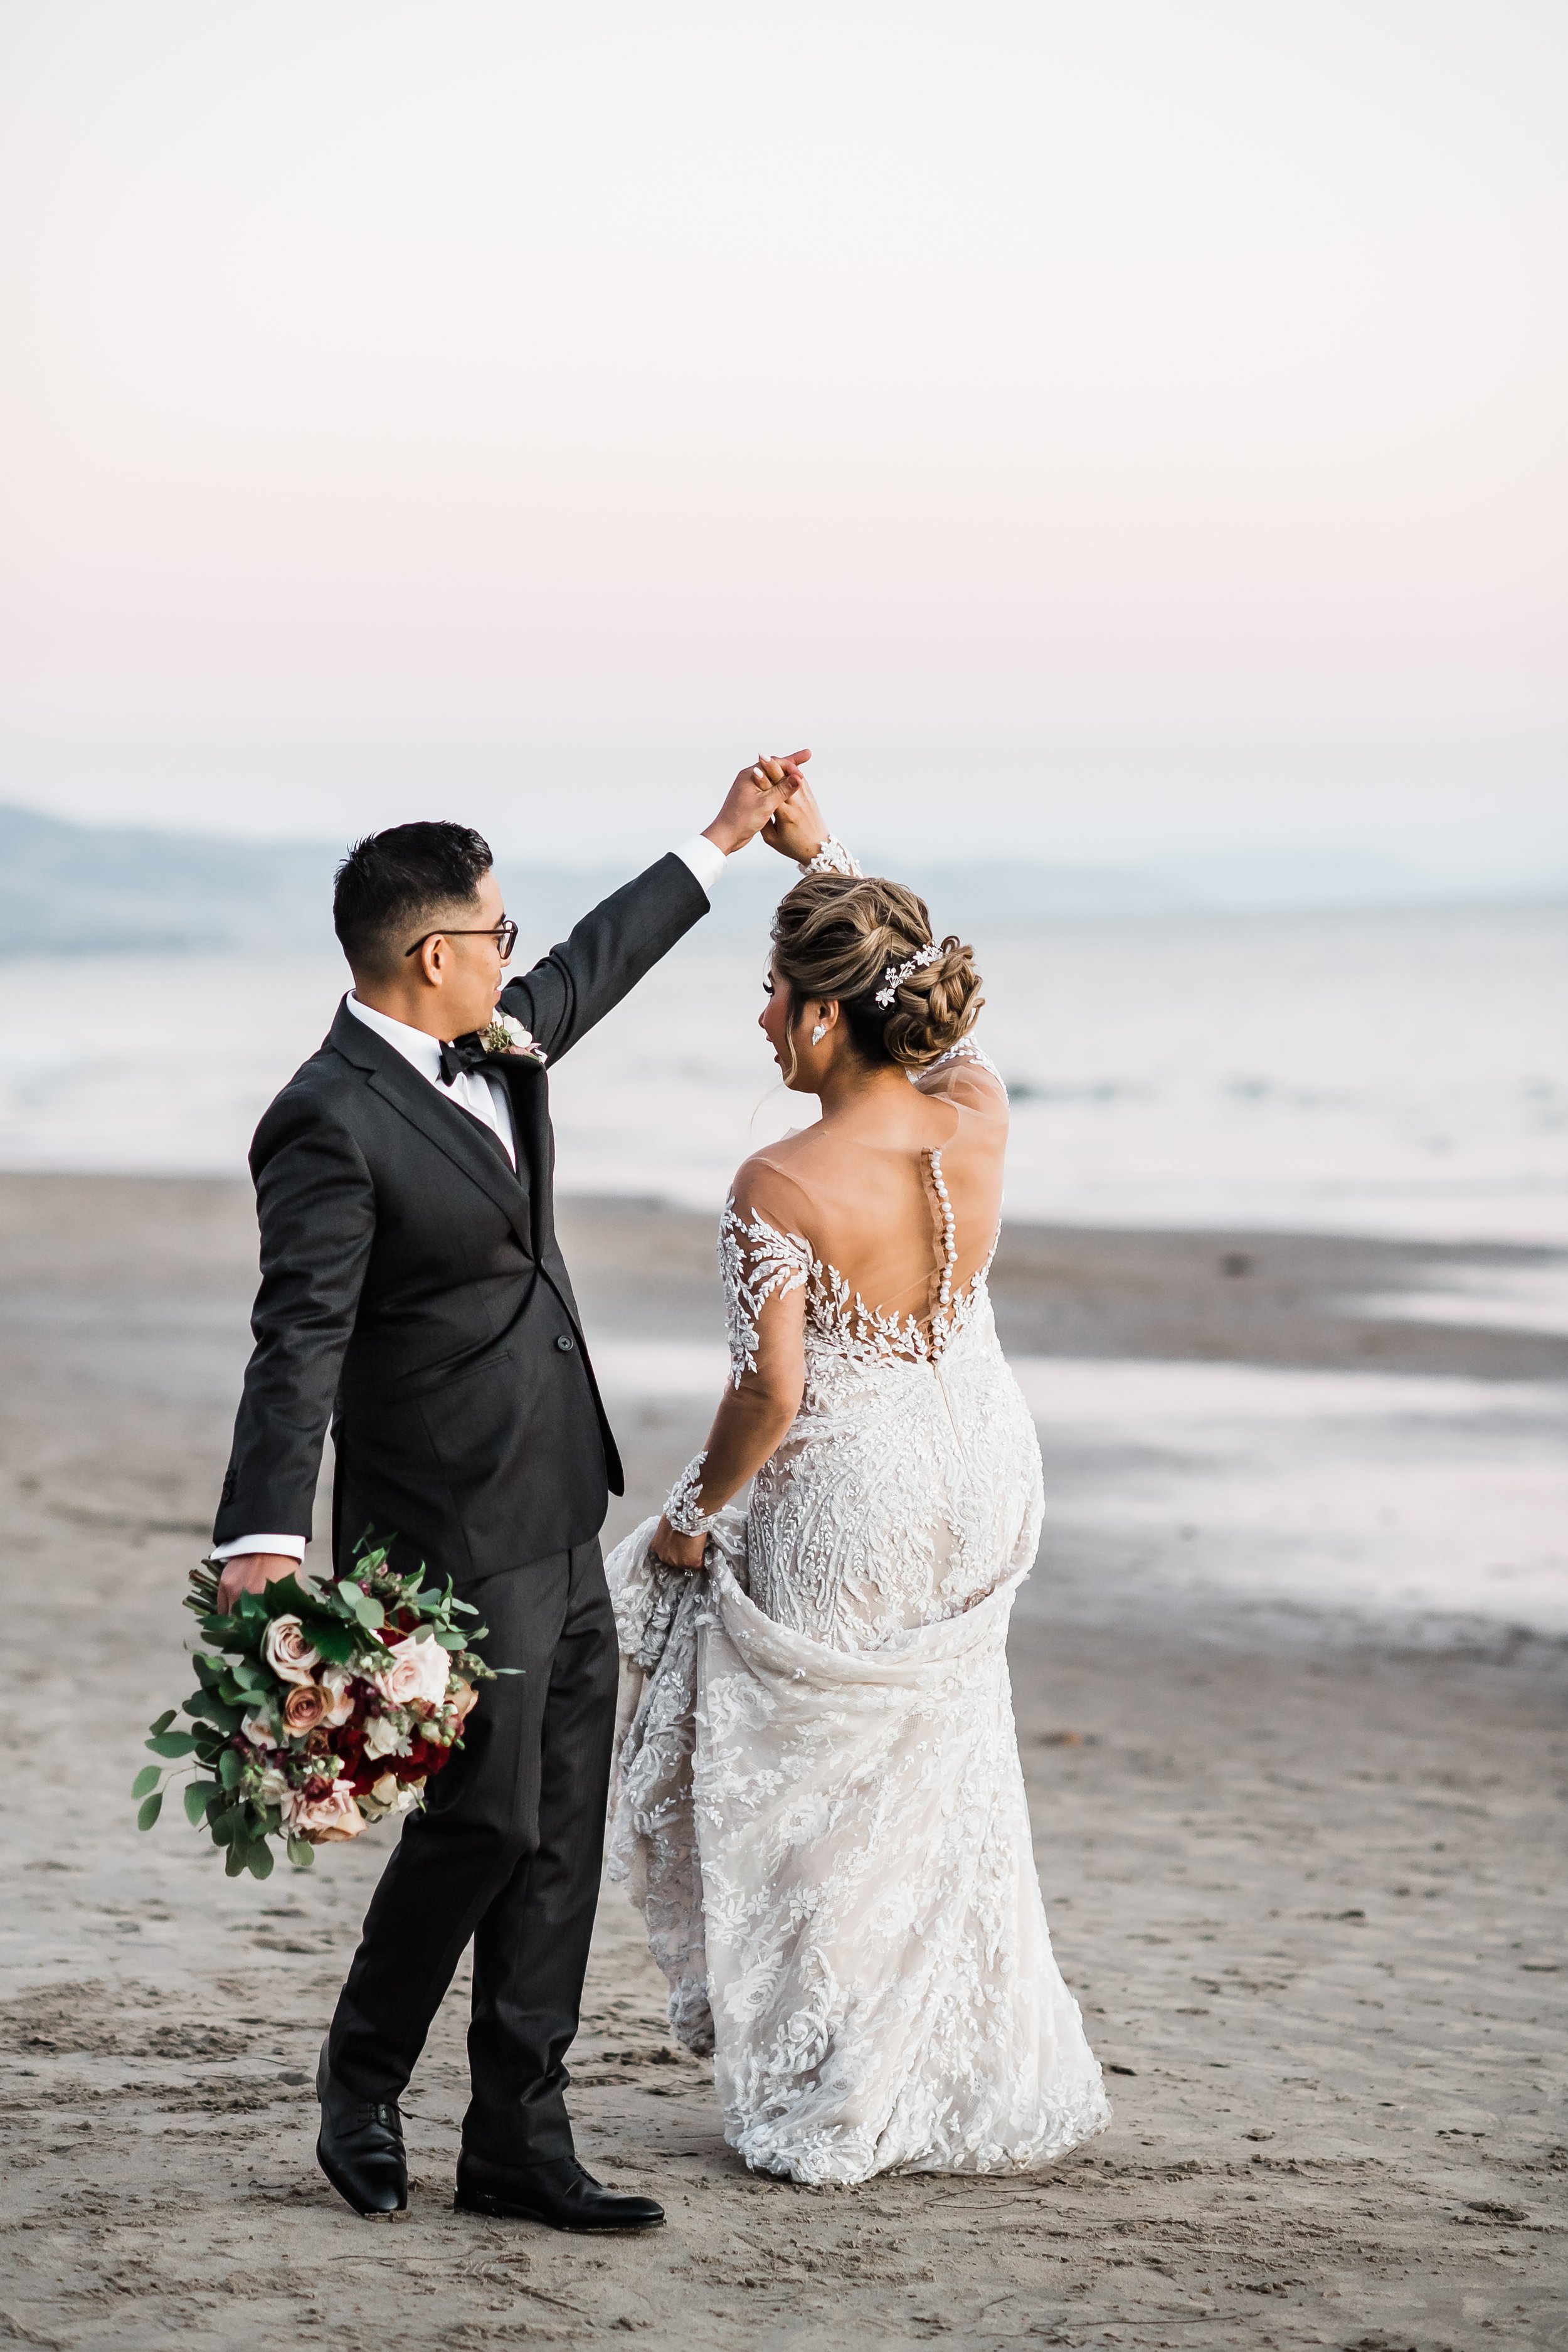 www.santabarbarawedding.com | Rosewood Miramar | Events by Maxi | Michelle Ramirez | Tangled Lotus | Bride and Groom Twirling on the Beach